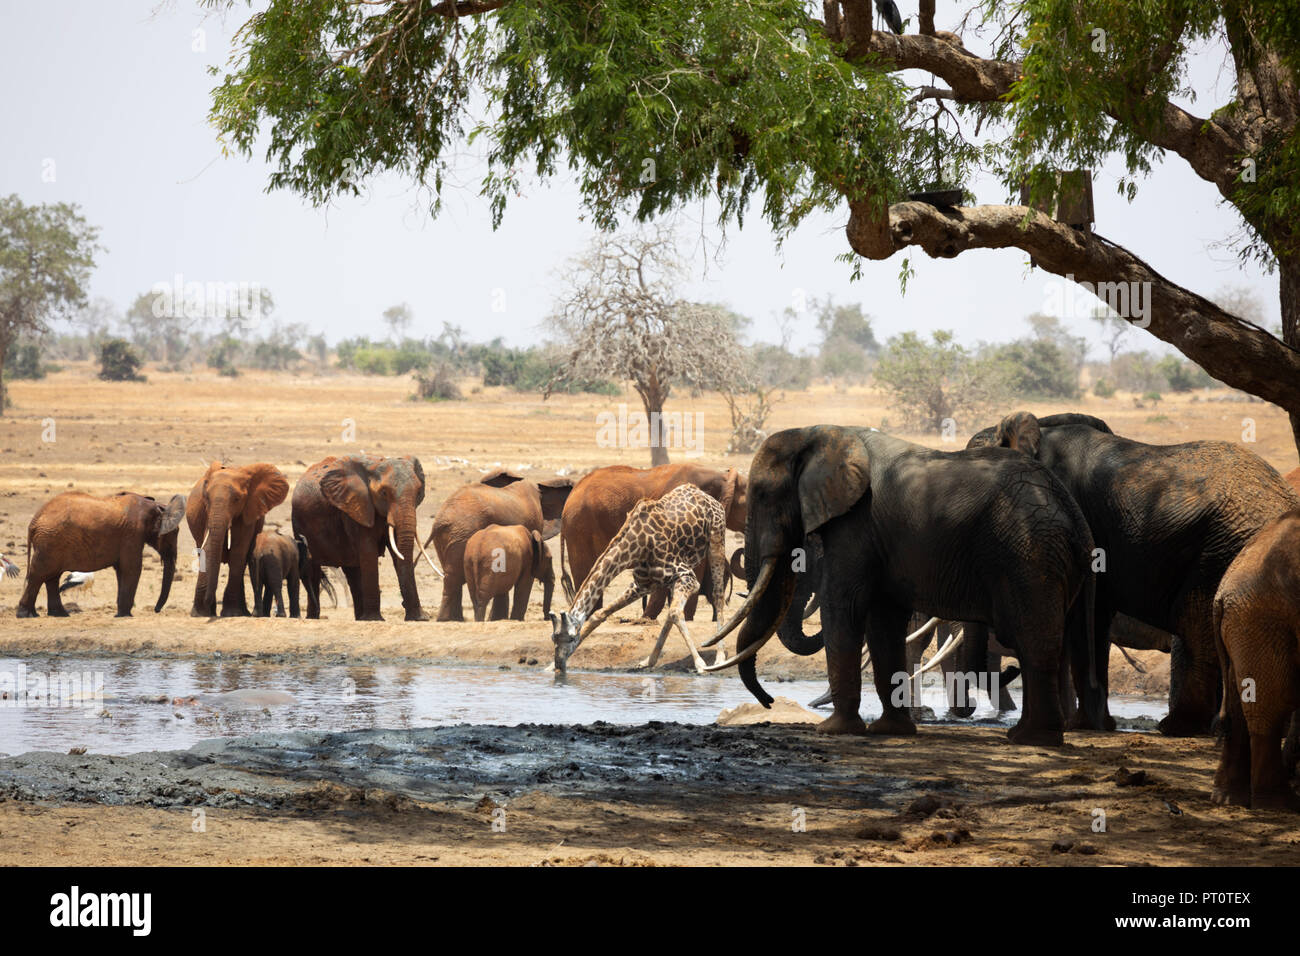 TSAVO EAST NATIONAL PARK, KENYA, AFRICA: A herd of African elephants and a giraffe at a watering hole on the dry savannah in afte Stock Photo